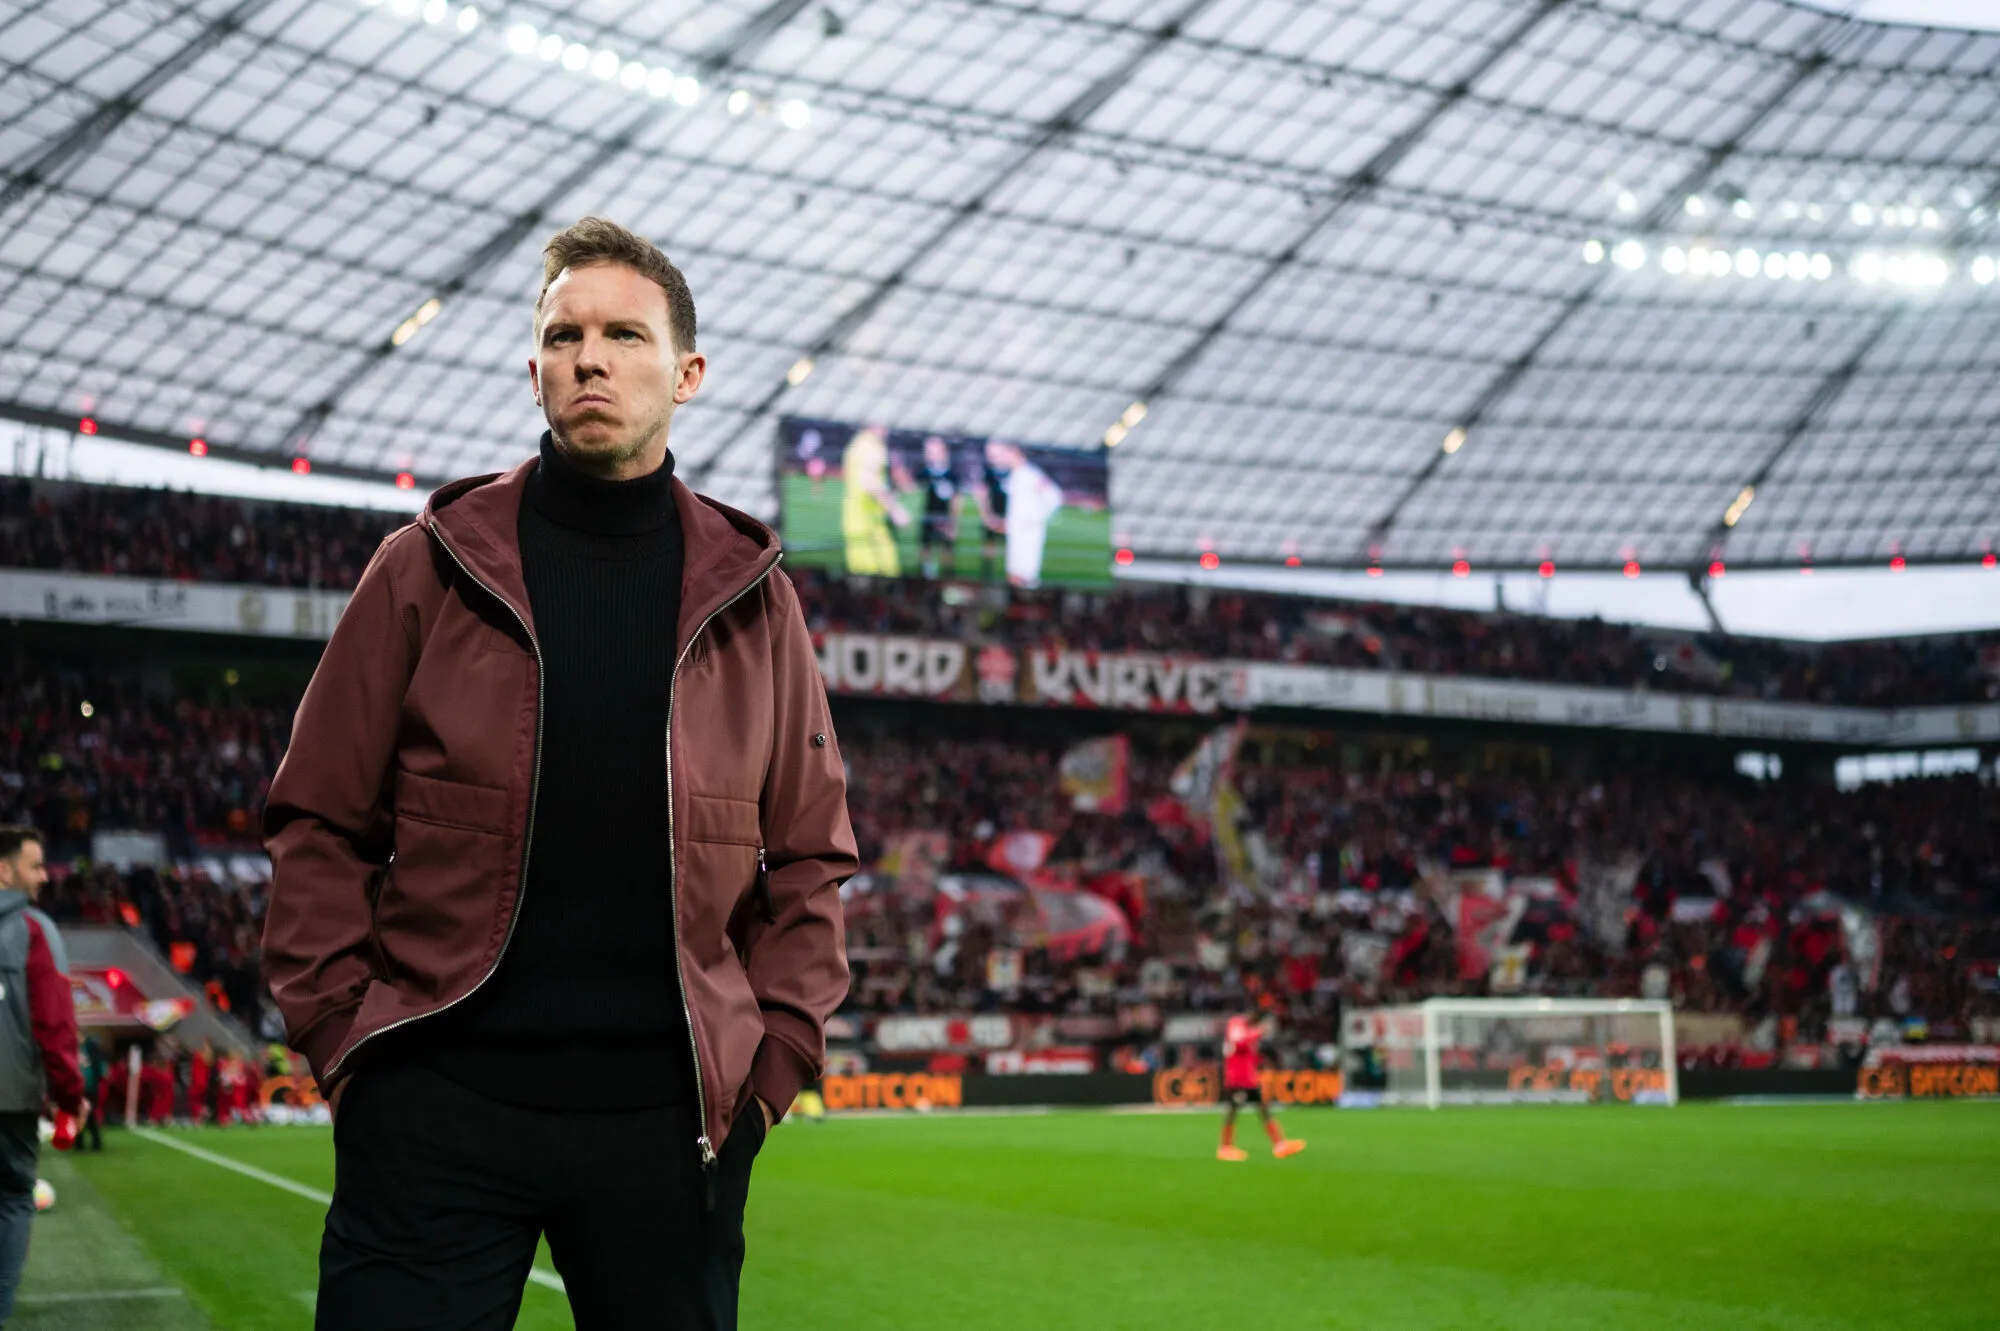 19 March 2023, North Rhine-Westphalia, Leverkusen: Soccer: Bundesliga, Bayer Leverkusen - Bayern Munich, Matchday 25, BayArena. Bayern coach Julian Nagelsmann enters the stadium. Photo: Marius Becker/dpa - IMPORTANT NOTE: In accordance with the requirements of the DFL Deutsche Fußball Liga and the DFB Deutscher Fußball-Bund, it is prohibited to use or have used photographs taken in the stadium and/or of the match in the form of sequence pictures and/or video-like photo series. - Photo by Icon sport